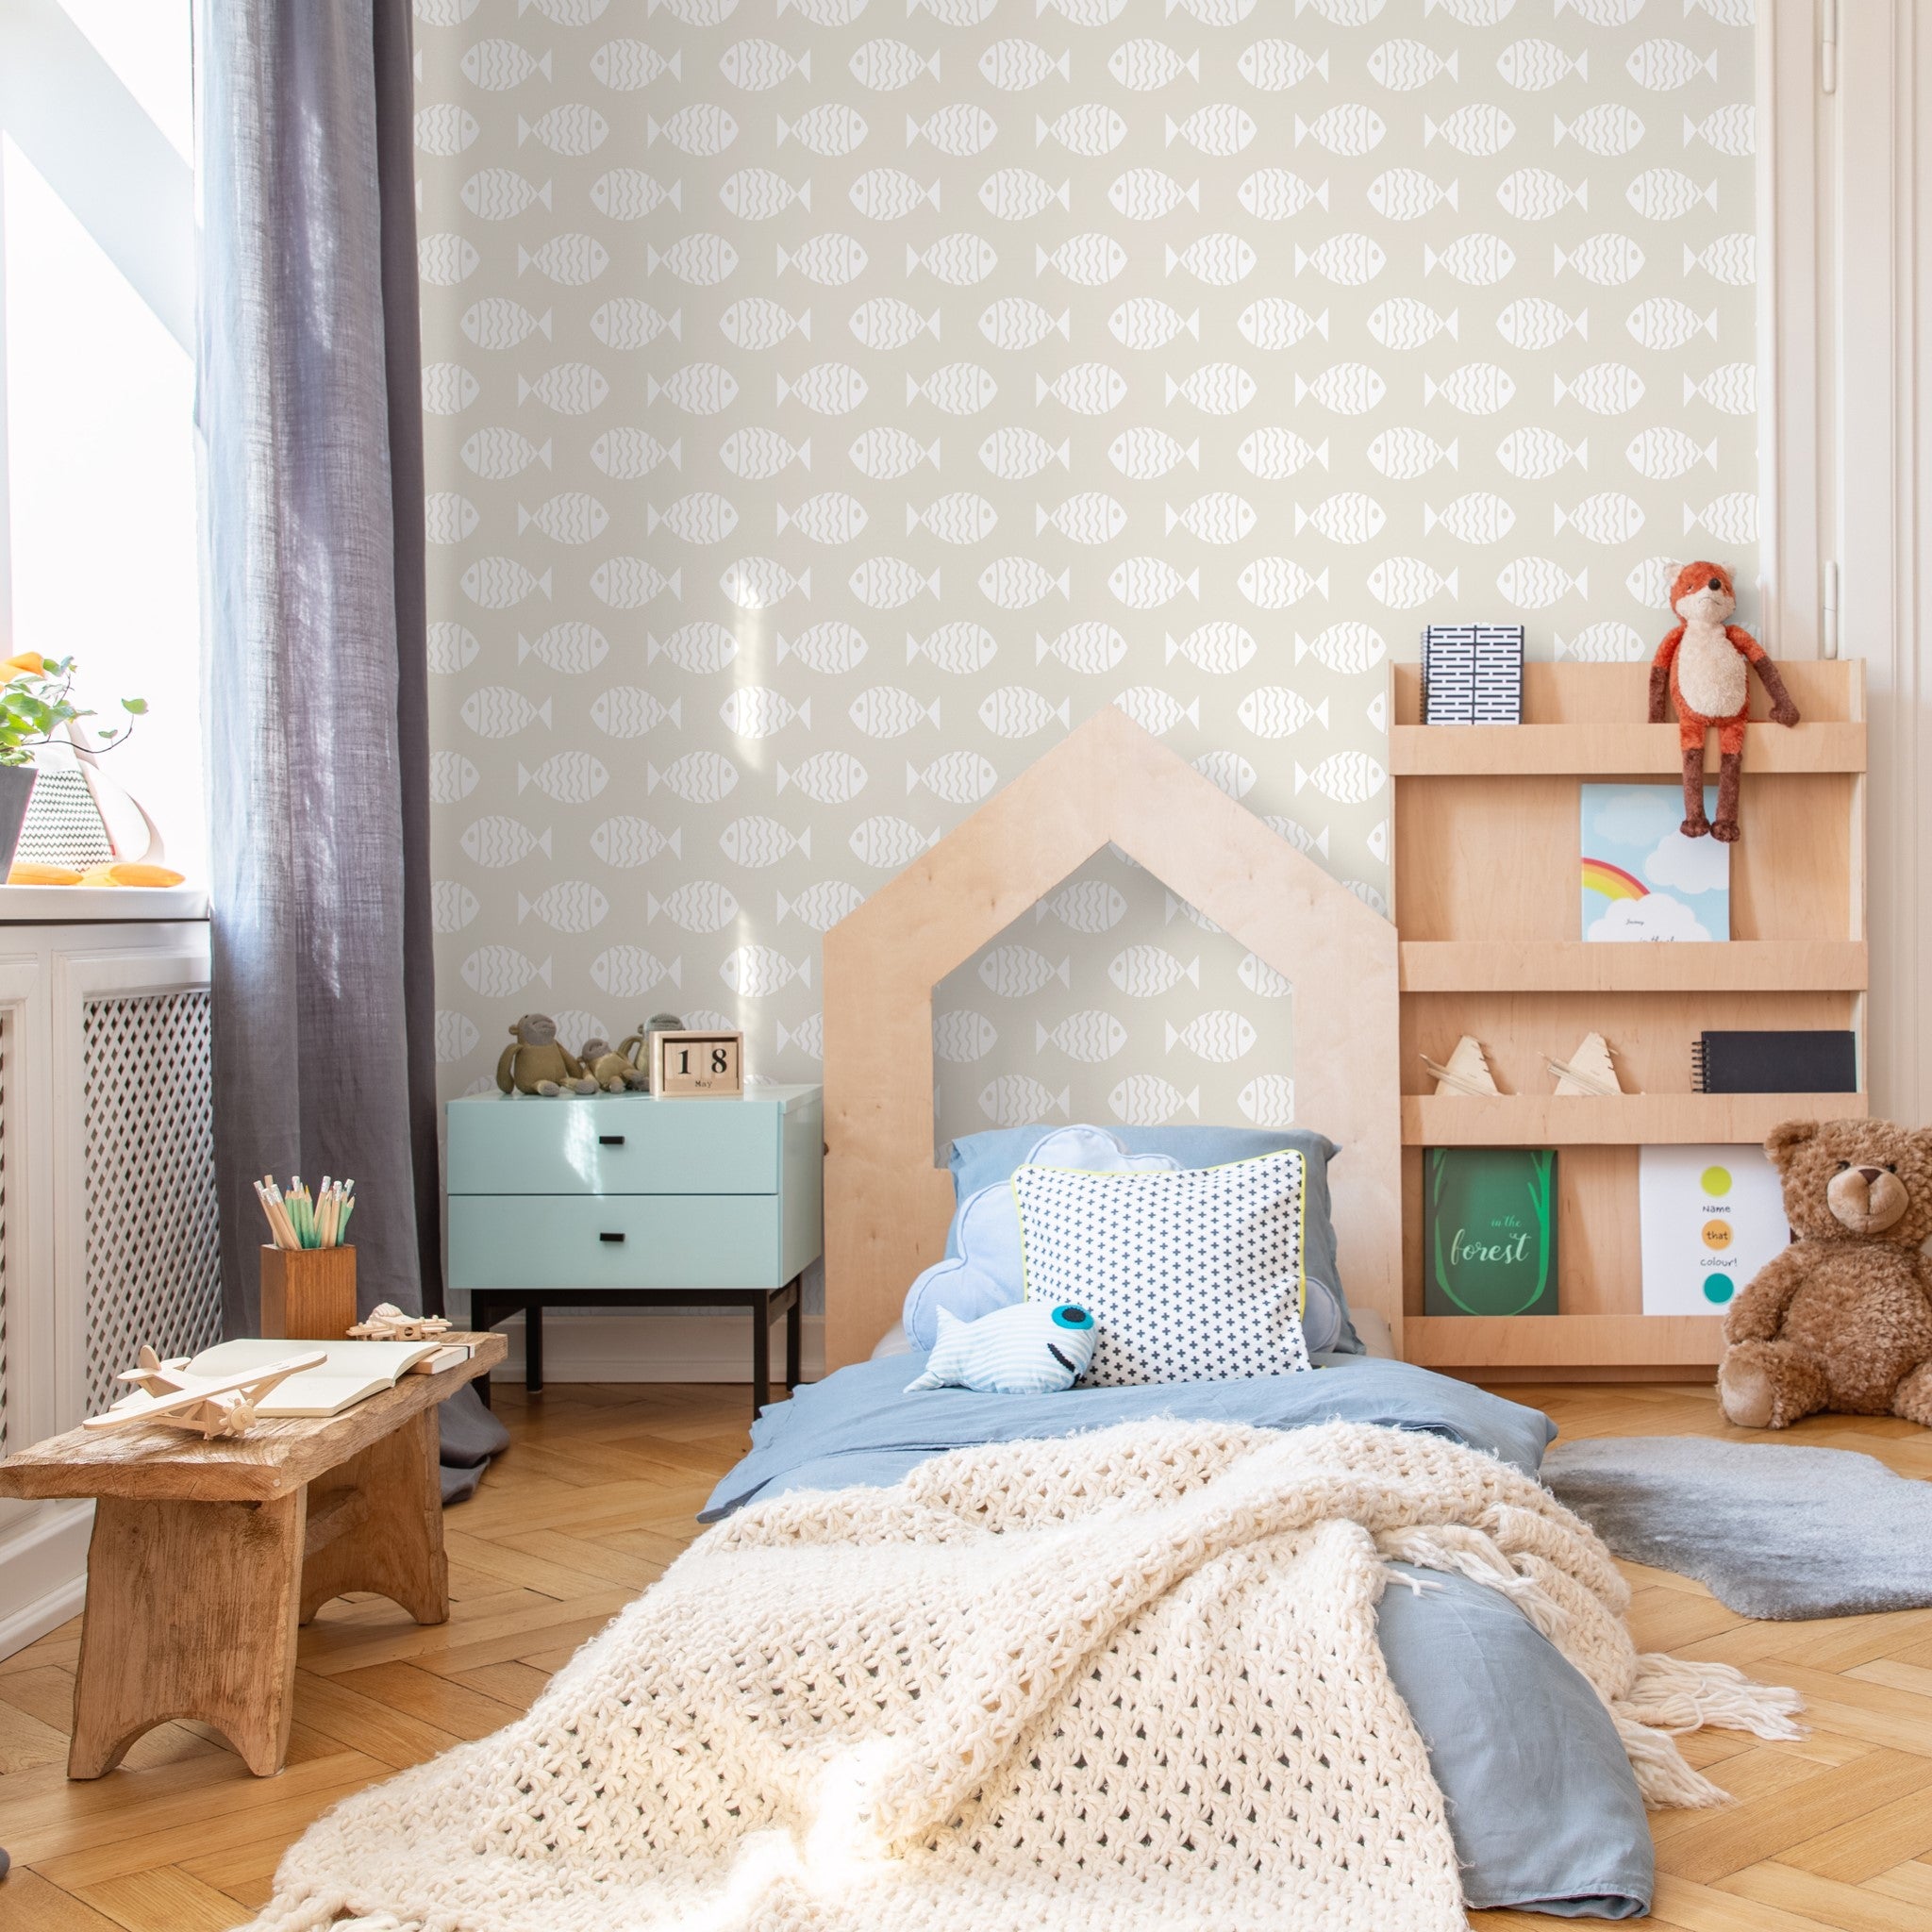 "Wall Blush's Keep Swimming Wallpaper in a cozy children's bedroom with stylish decor and wooden furniture."